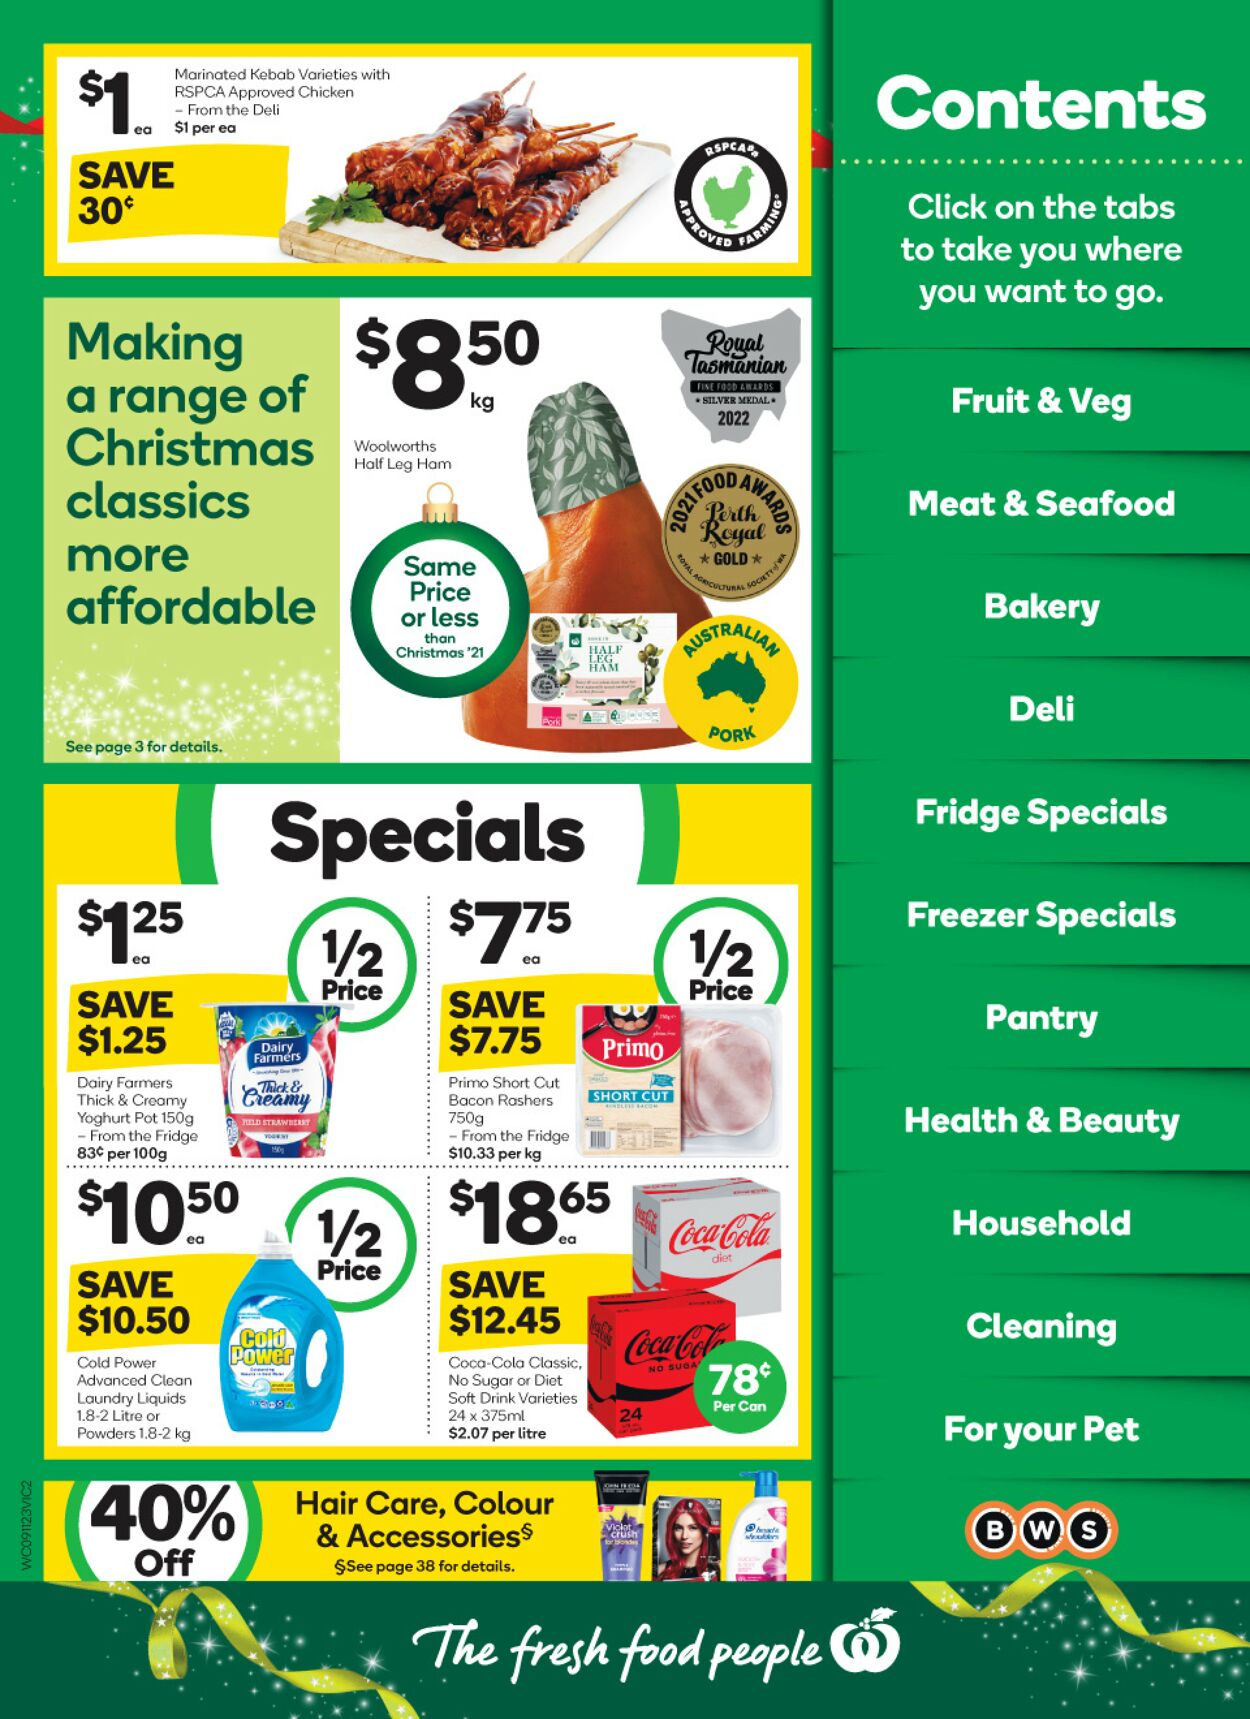 Woolworths Catalogue - 09/11-15/11/2022 (Page 2)